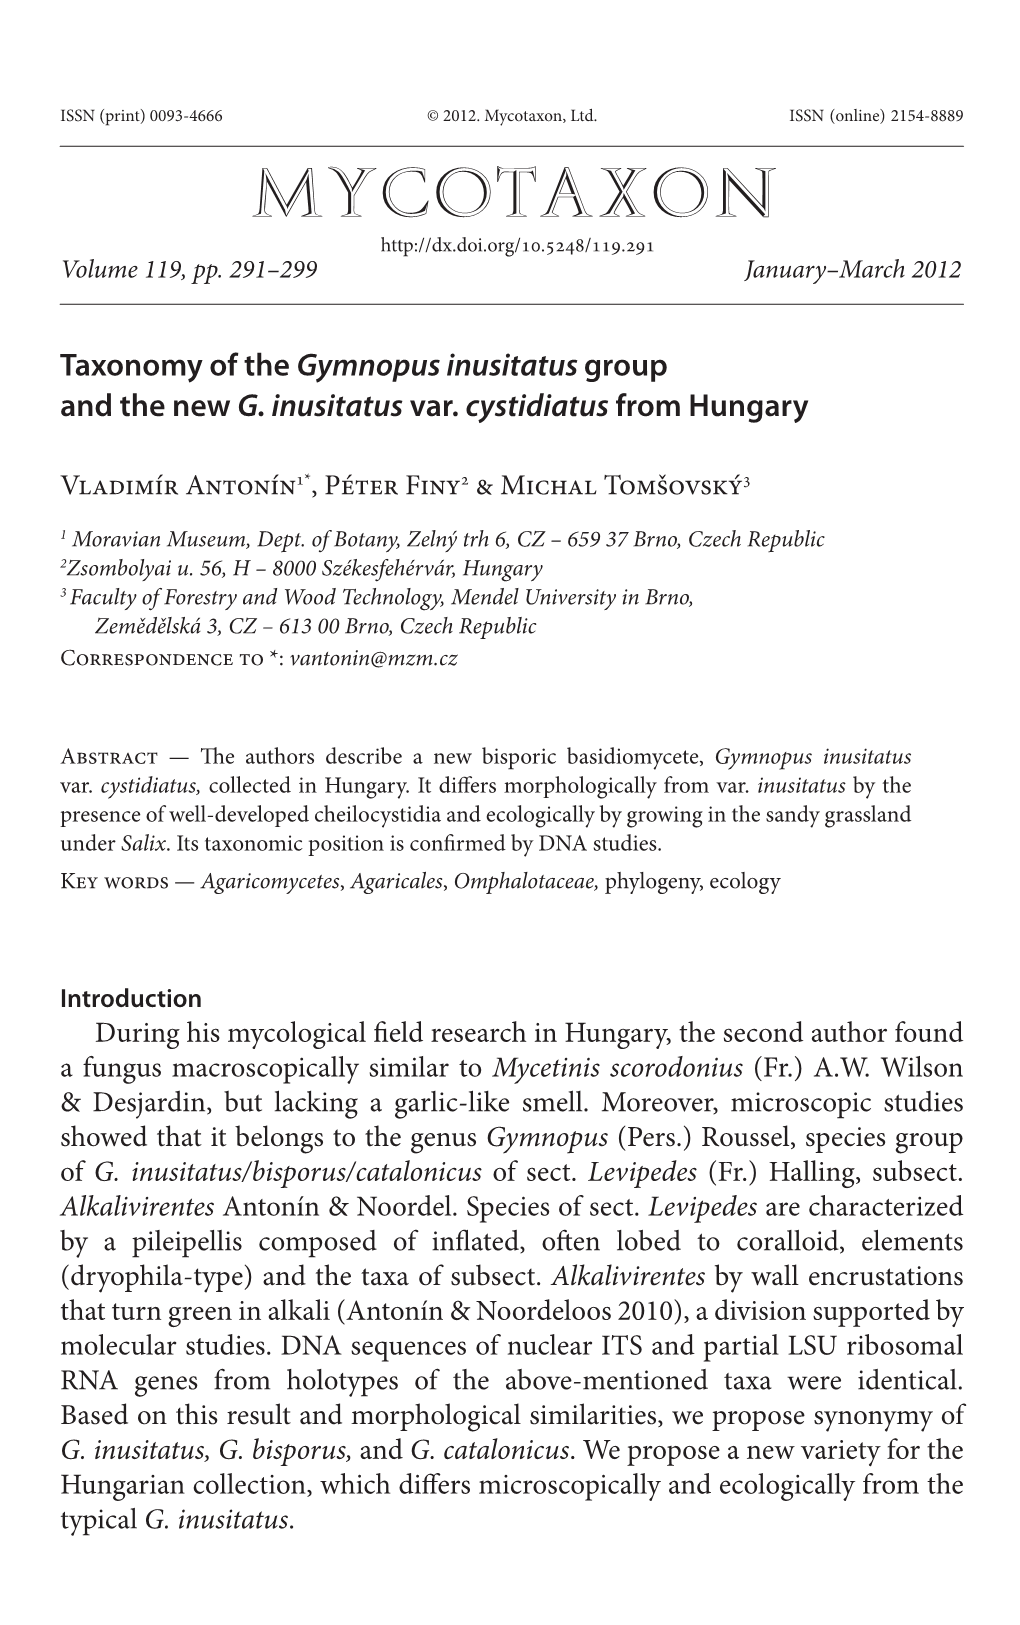 &lt;I&gt;Gymnopus Inusitatus&lt;/I&gt; Group and The